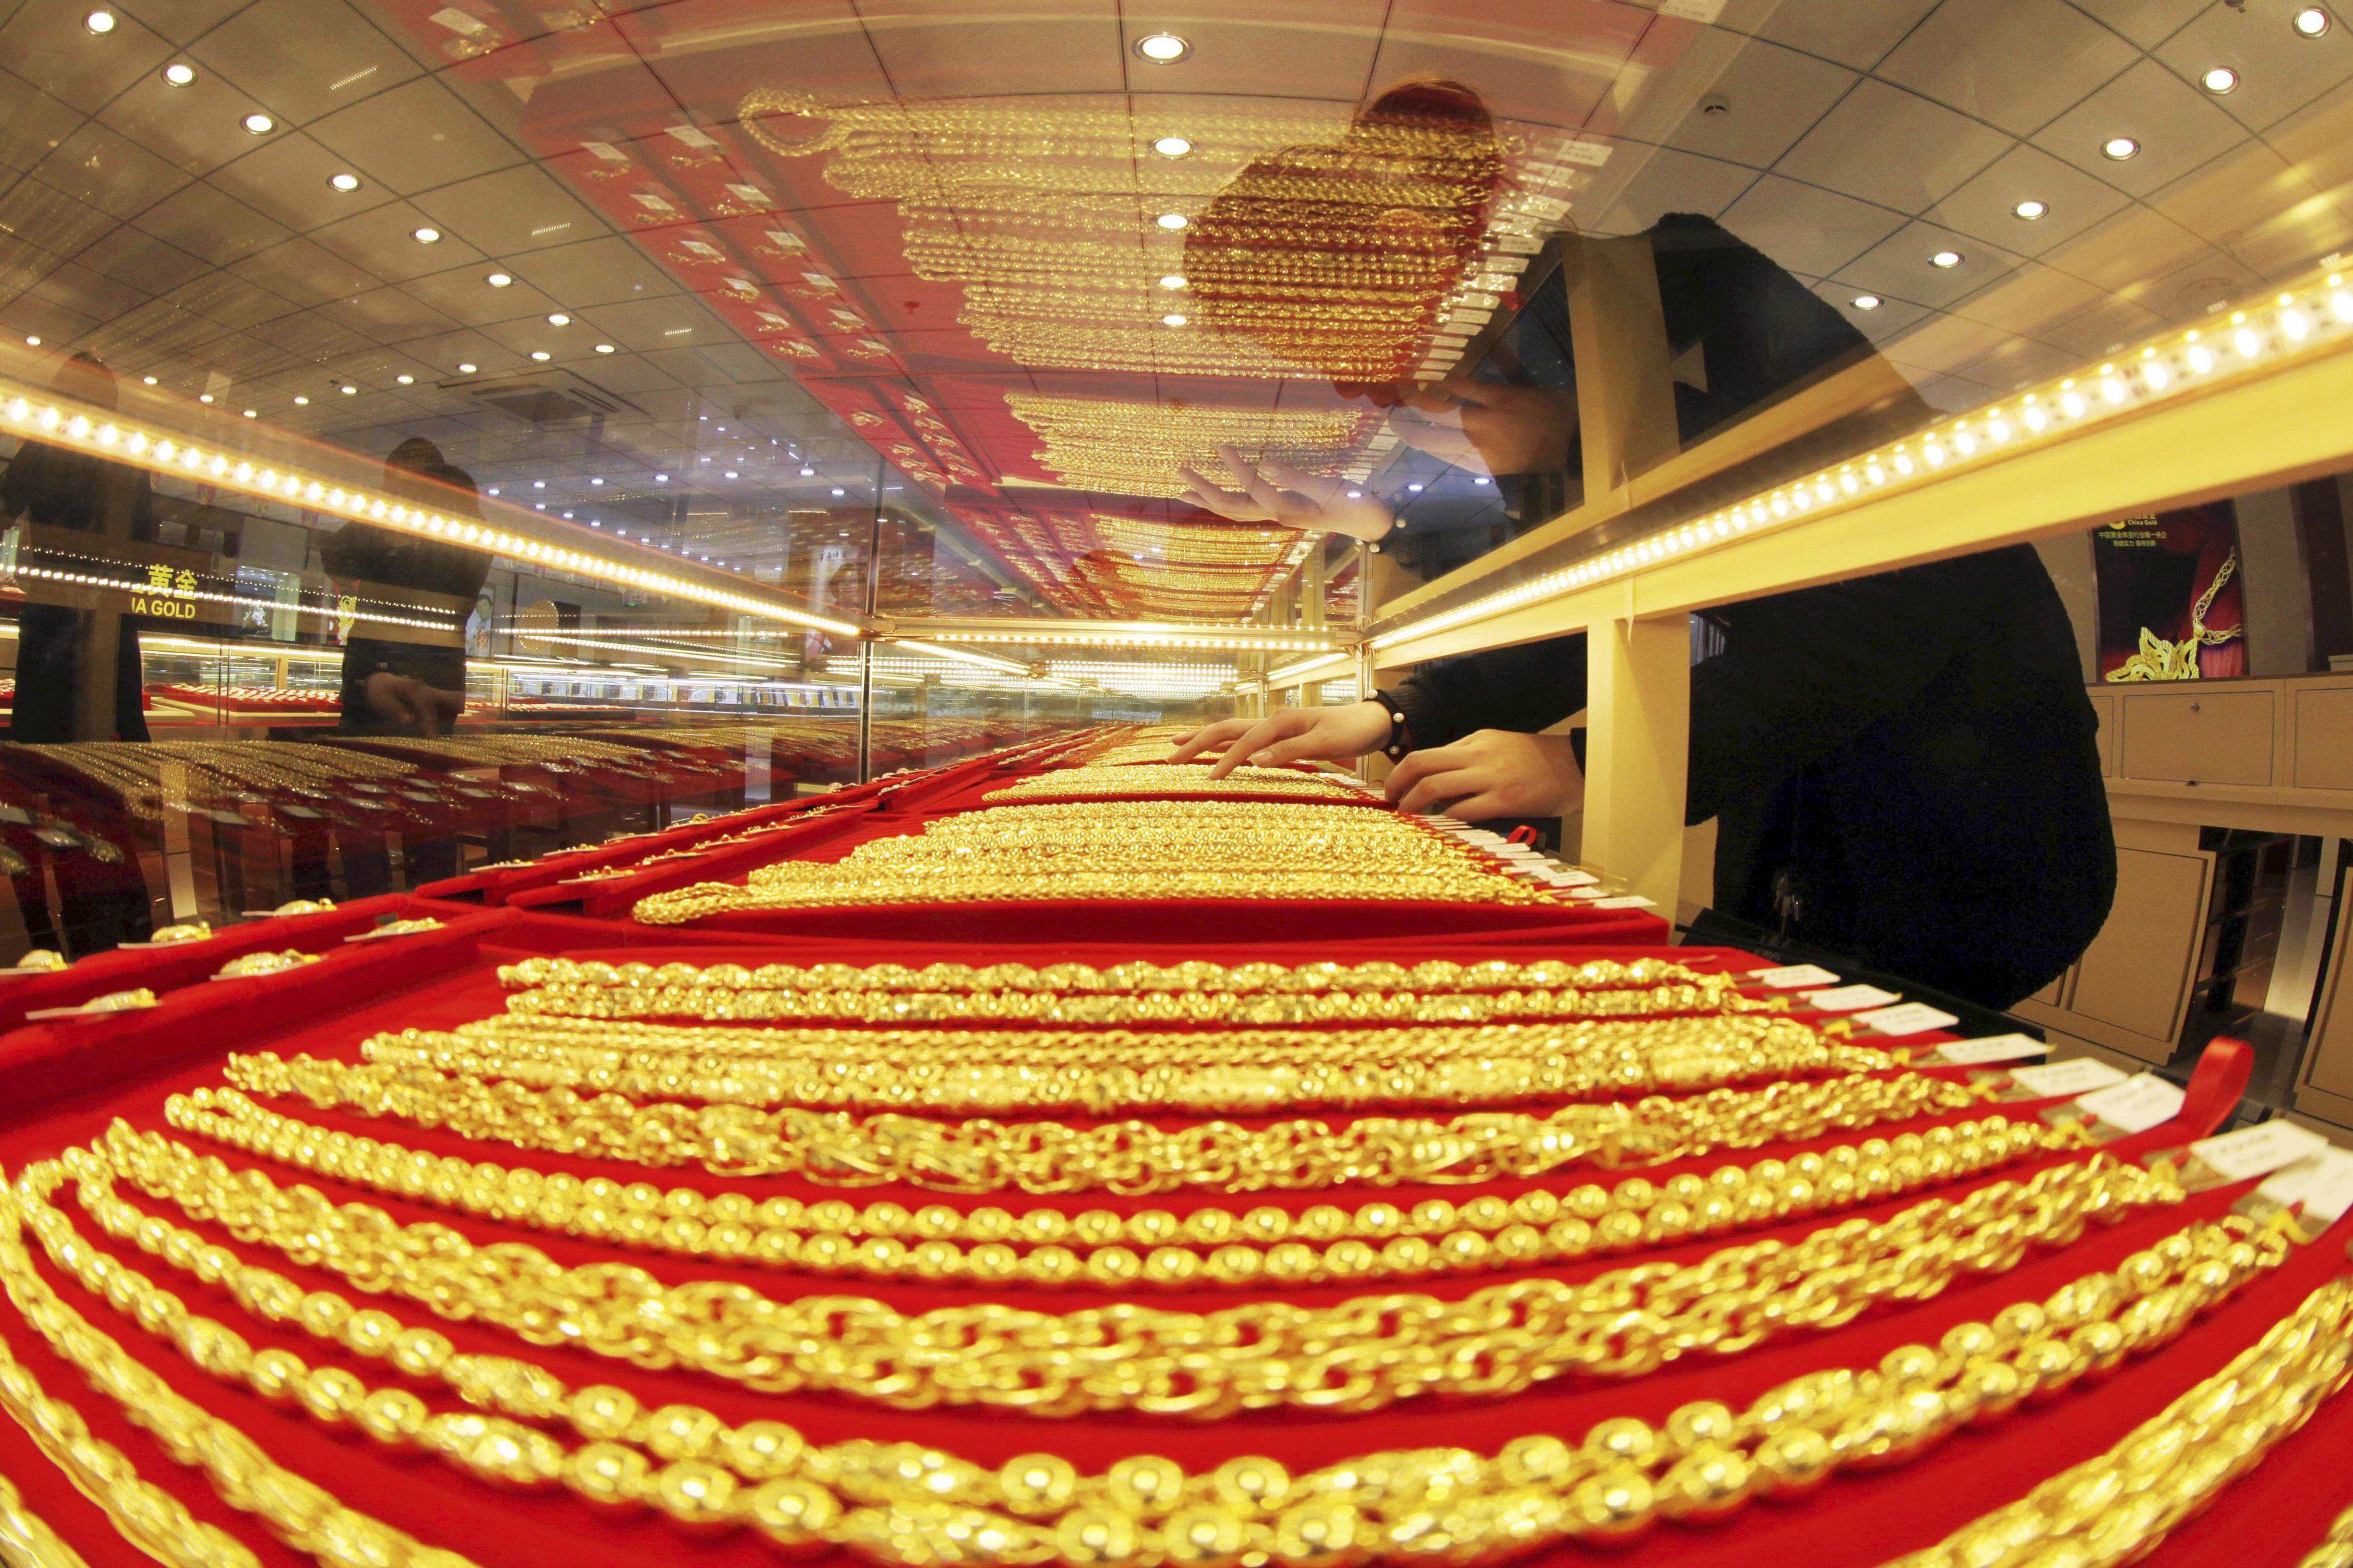 A sales assistant arranges gold necklaces at a store in China’s Jiangsu province. Photo: Reuters